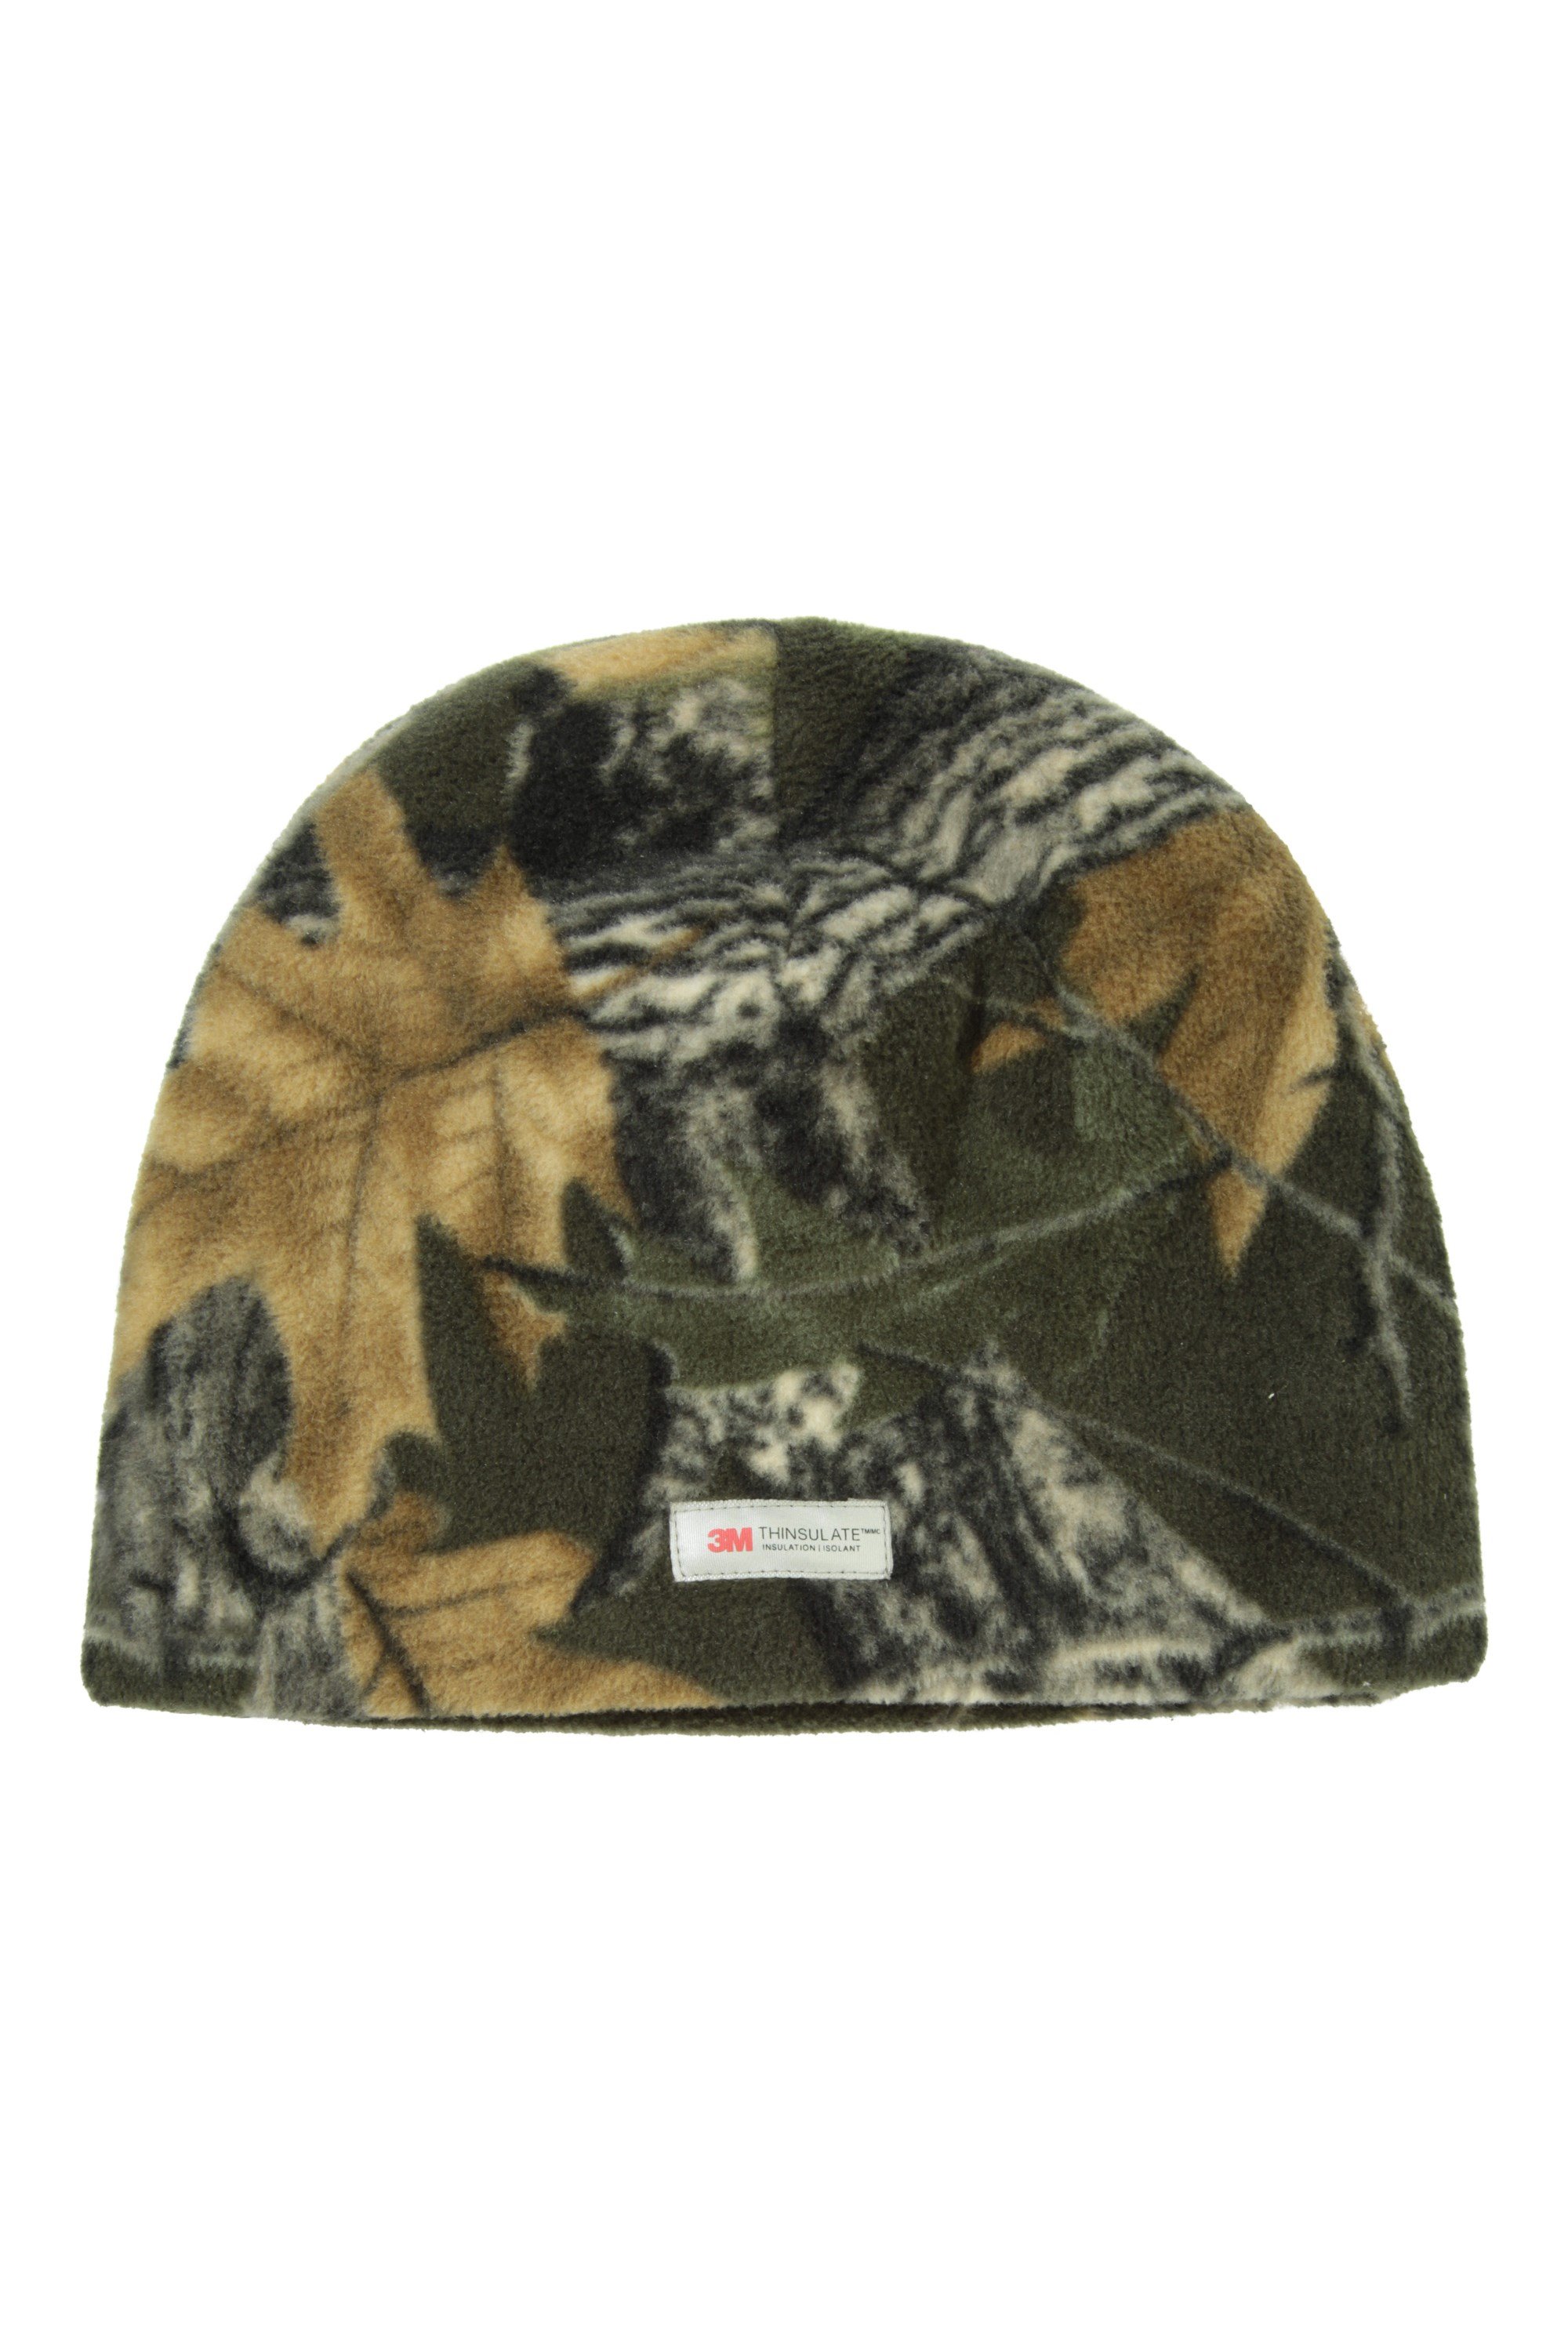 Camouflage Thinsulate Mens Beanie - Green